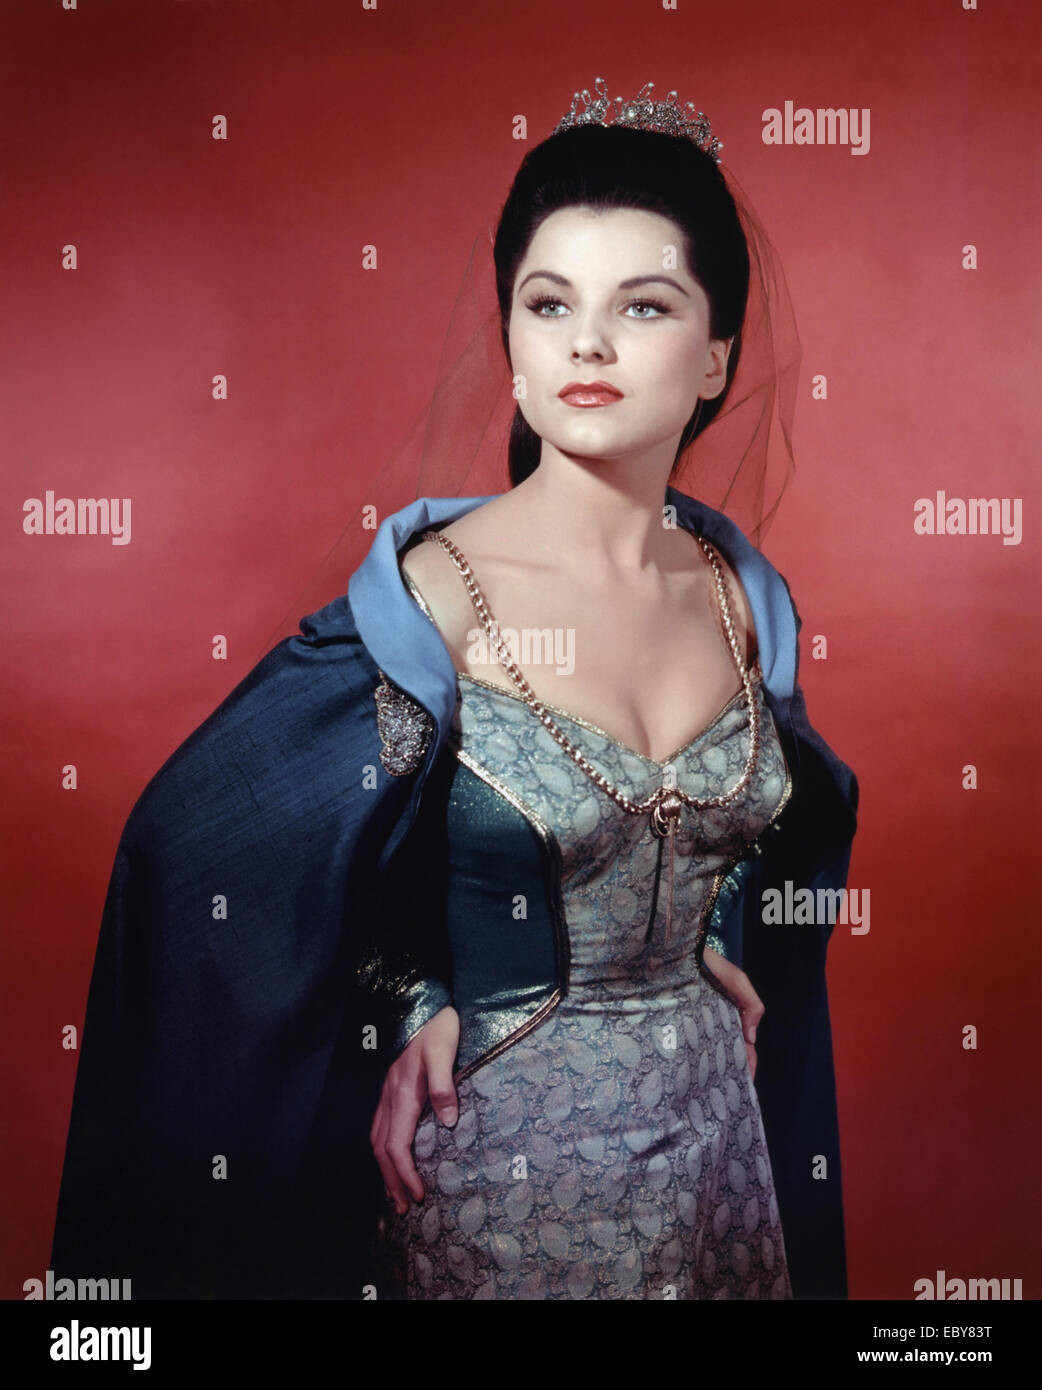 DEBRA PAGET  US film actress about 1956 Stock Photo